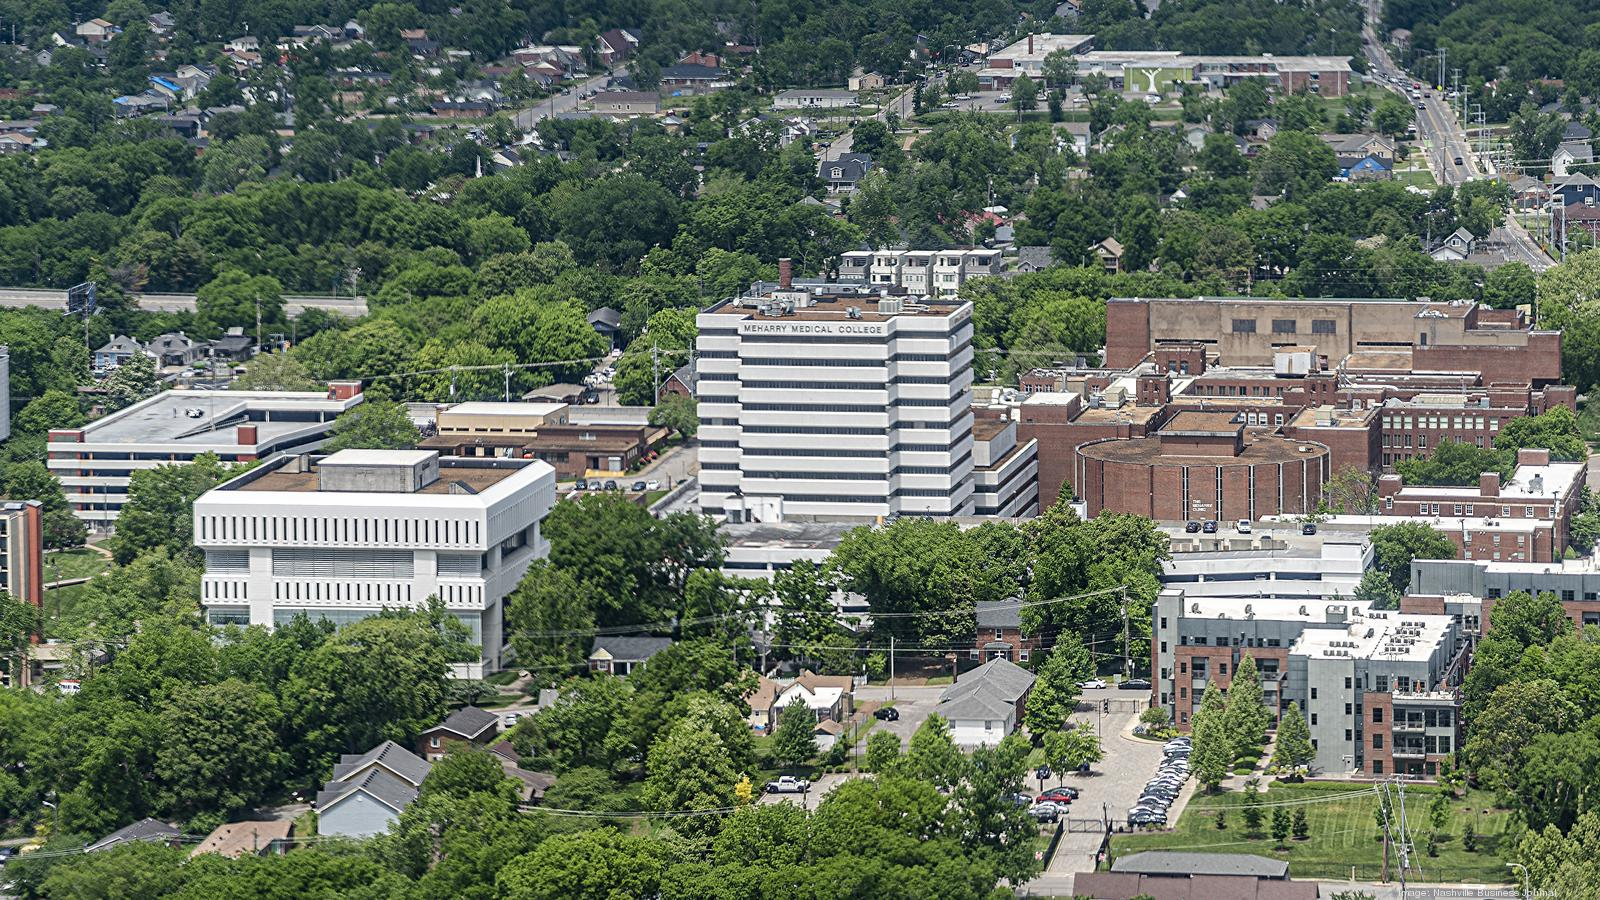 Aerial view of Meharry Medical College campus, showcasing its buildings, green spaces, and surrounding area.